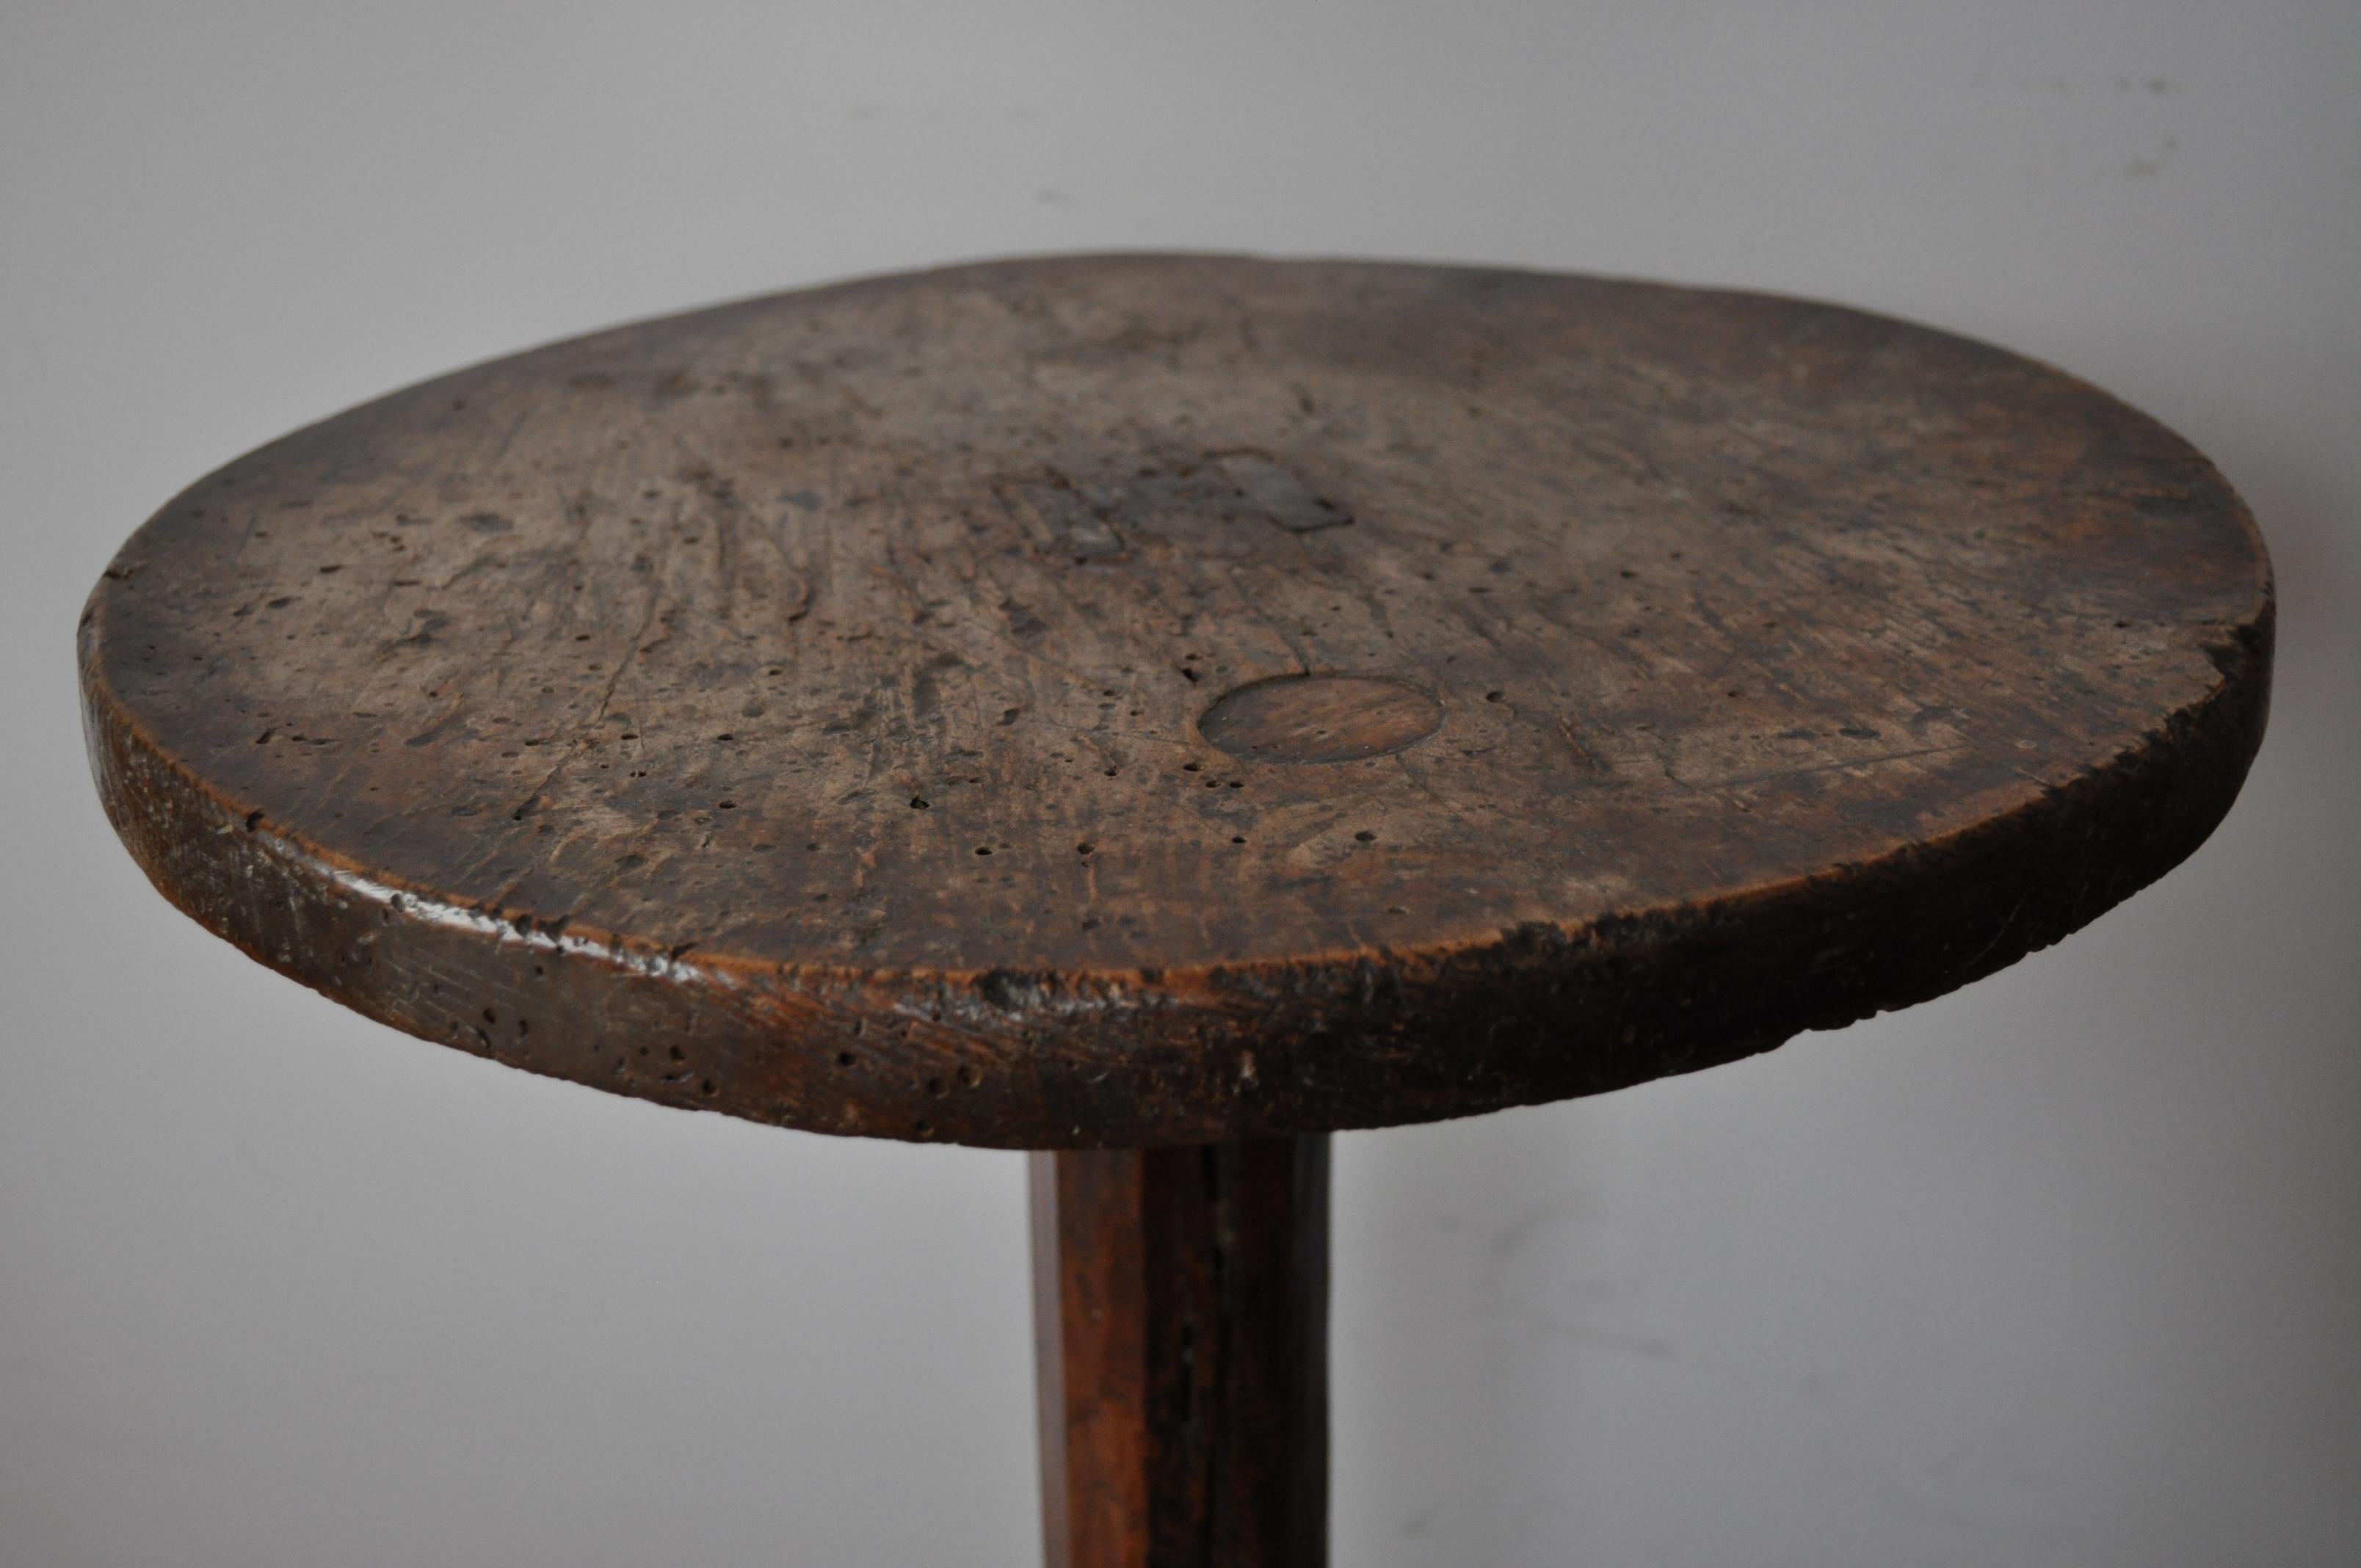 A very rare and unusual haute époque French tripod table, in beautiful untouched condition with superb color and patination. A nice thick beech top with through tenons, chamfered oak column with legs pegged on. The legs are tenoned in on the sides